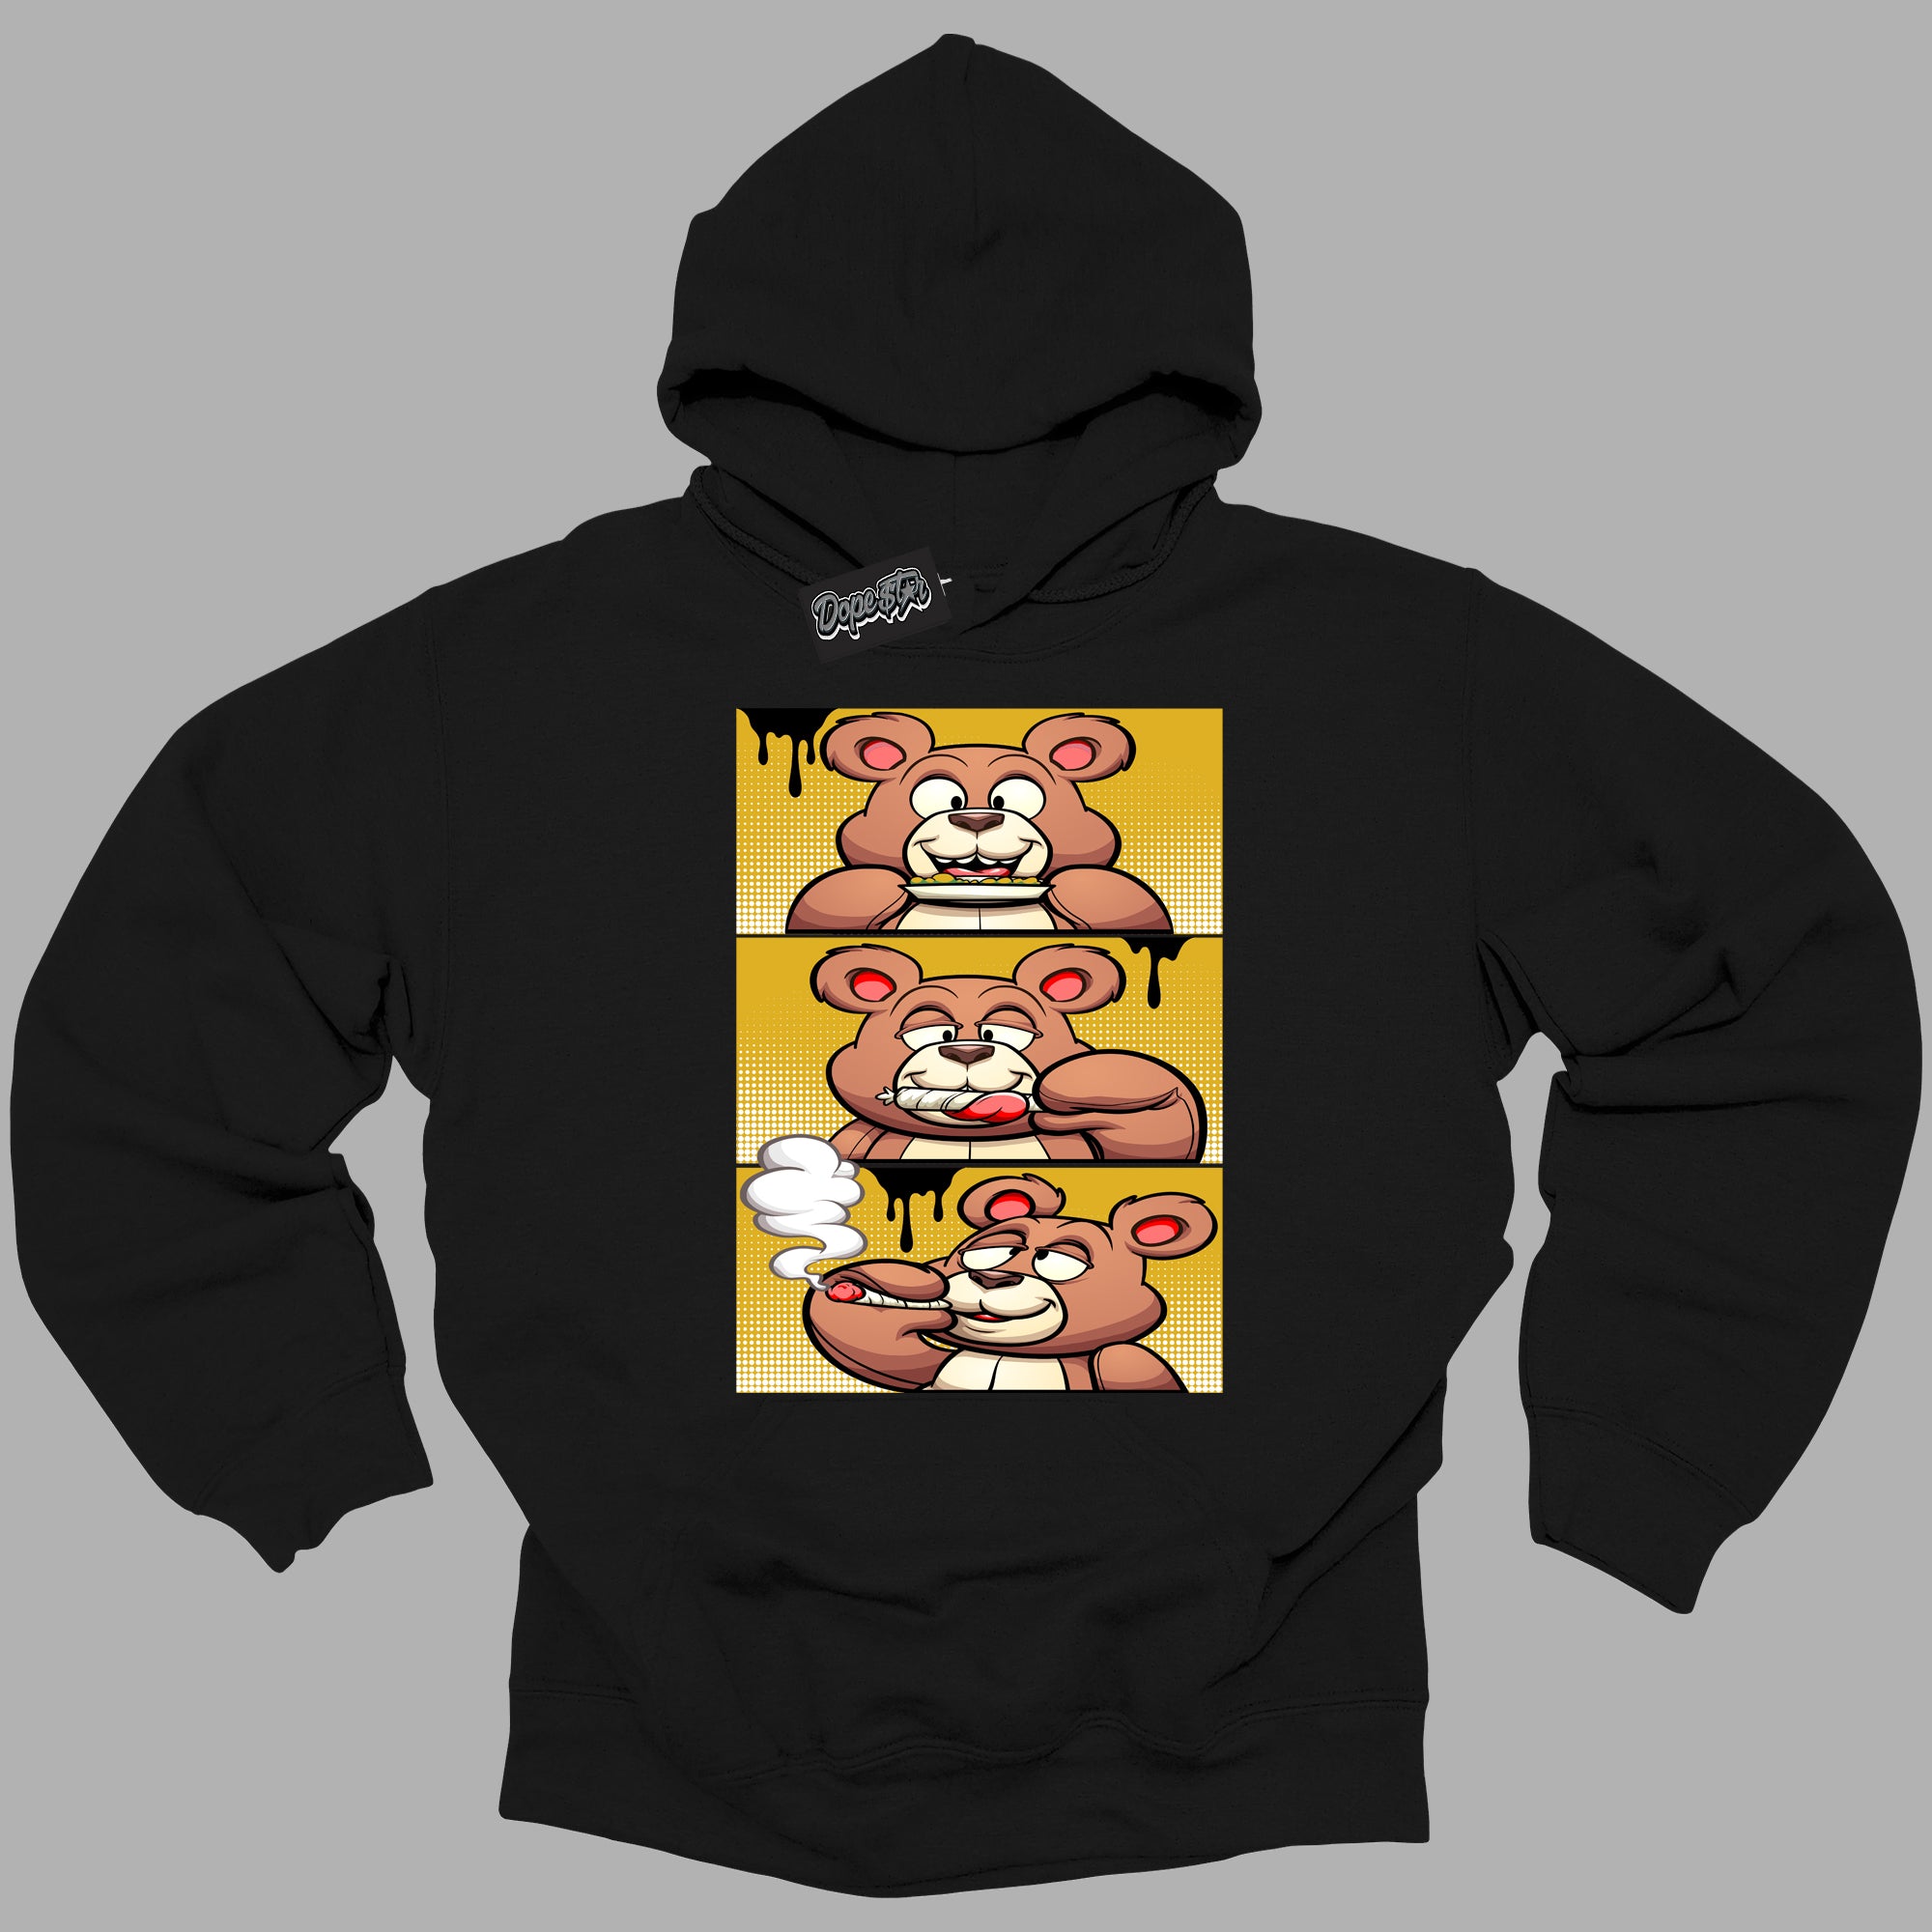 Cool Black Hoodie with “ Roll It Lick It Smoke It Bear ”  design that Perfectly Matches Yellow Ochre 6s Sneakers.